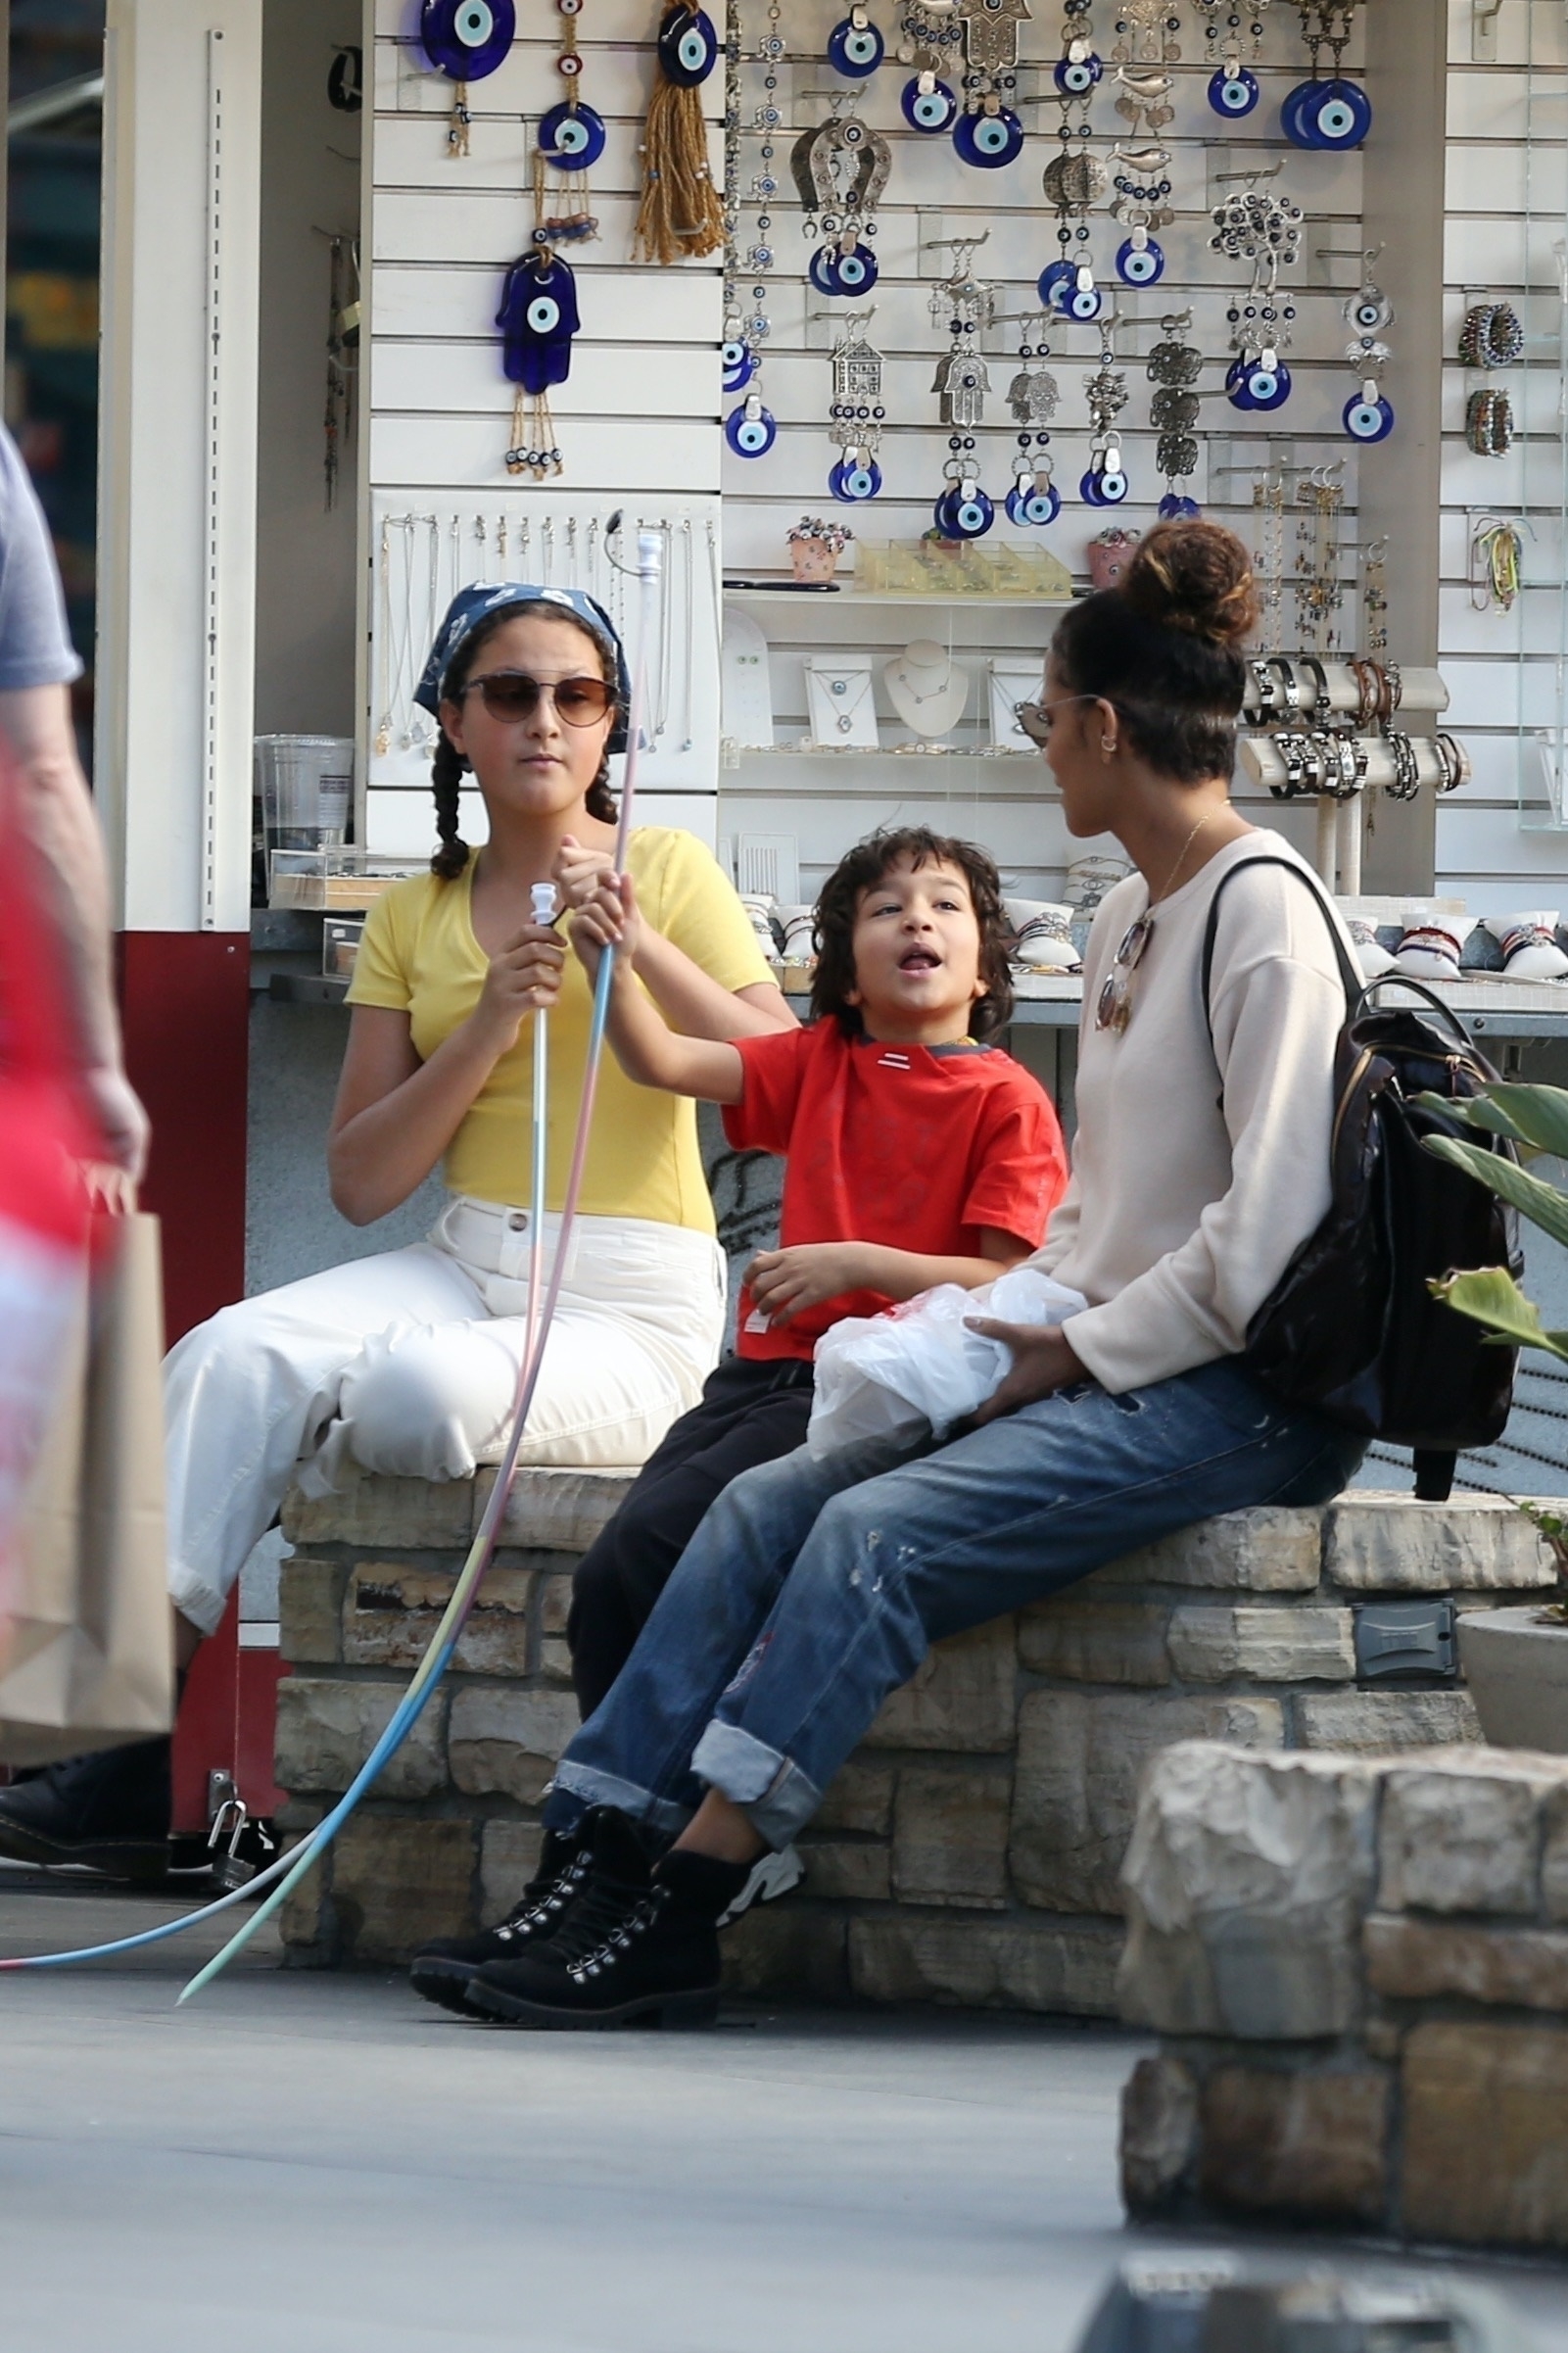 Los Angeles, CA  - *EXCLUSIVE*  - Halle Berry spends some quality family time with her kids: daughter Nahla and son Maceo. The trio had lunch at La Piazza Restaurant at The Grove, where she sipped on a glass of wine then they went shopping for toys.

BACKGRID USA 2 FEBRUARY 2020,Image: 496139044, License: Rights-managed, Restrictions: , Model Release: no, Credit line: Stefan / BACKGRID / Backgrid USA / Profimedia